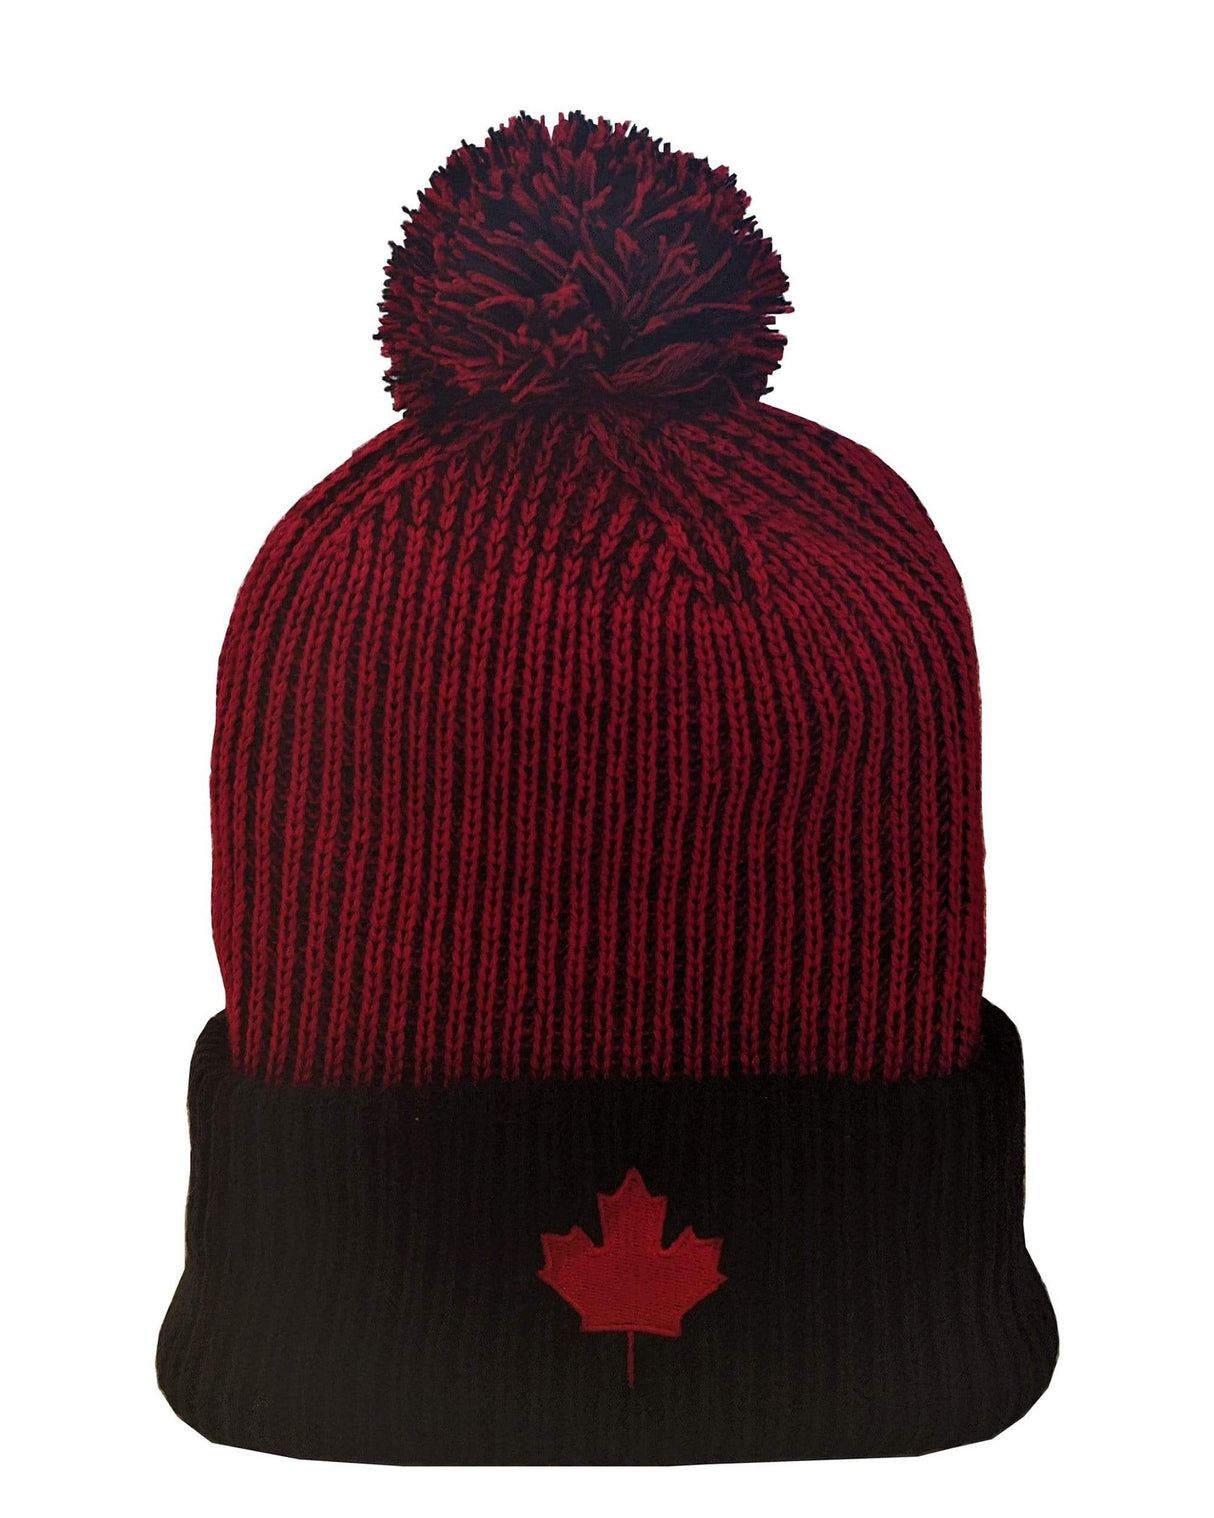 Canada Puffin Knit Toque in red and black with pom-pom and maple leaf emblem